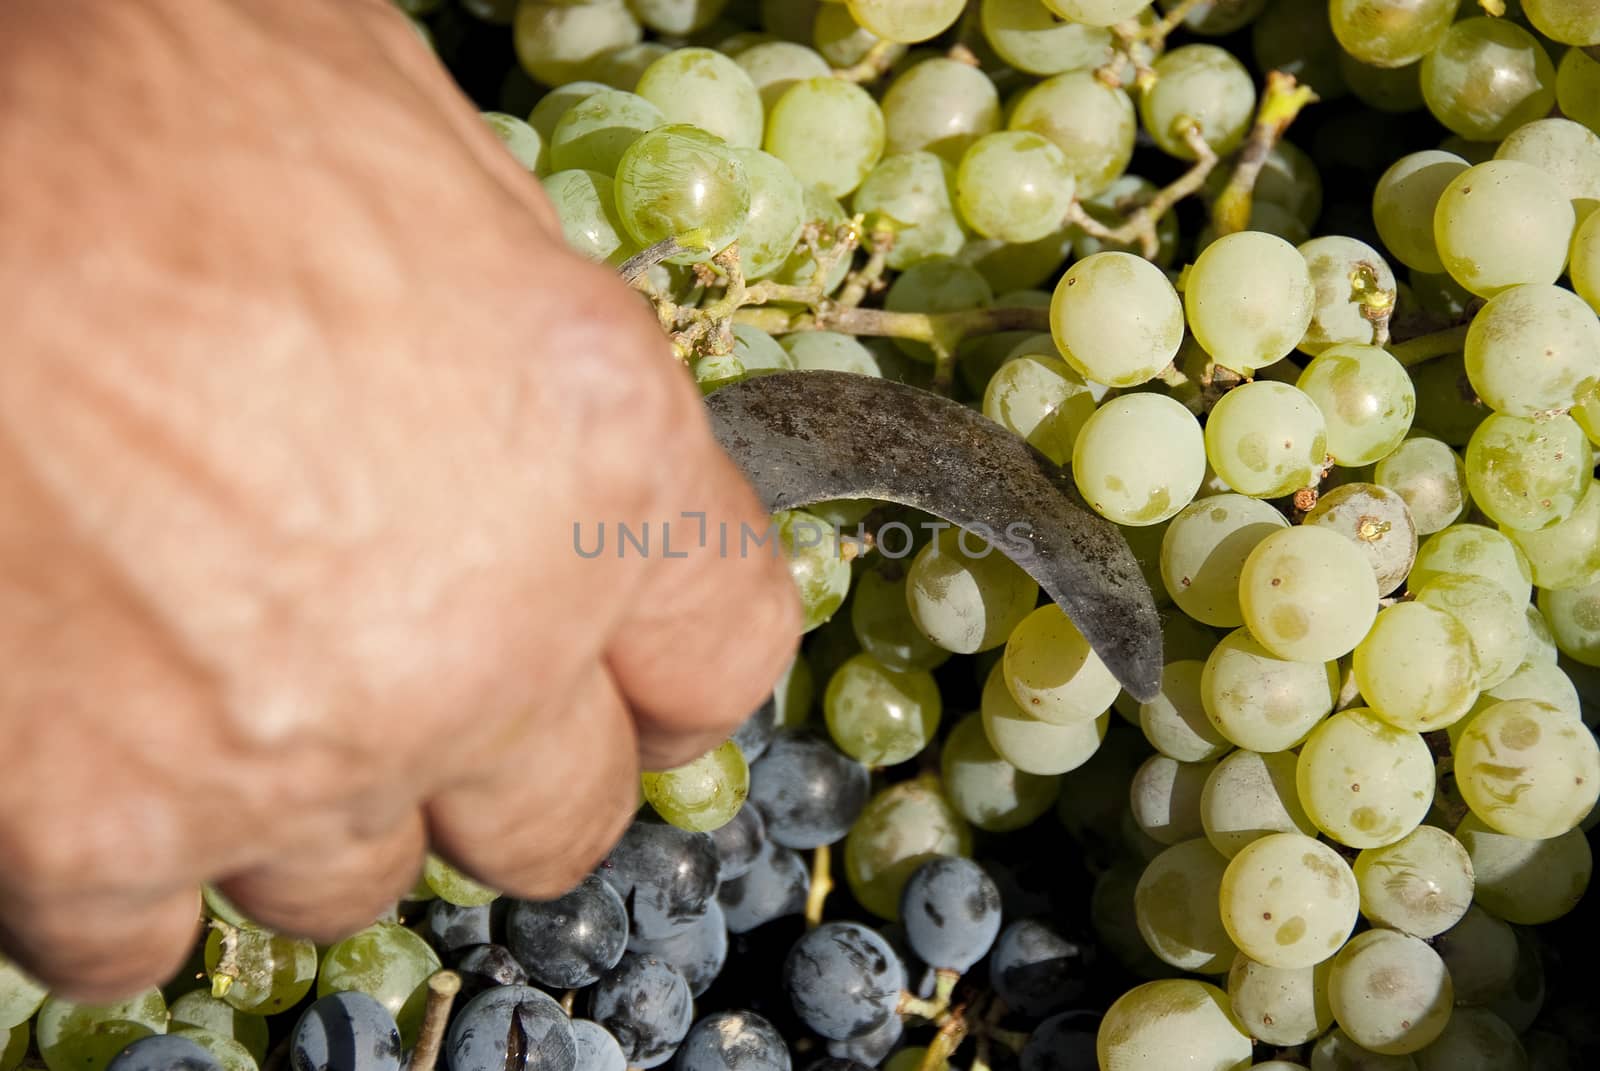 harvesting, black grapes, bunches of grapes, white grapes, tool for harvesting